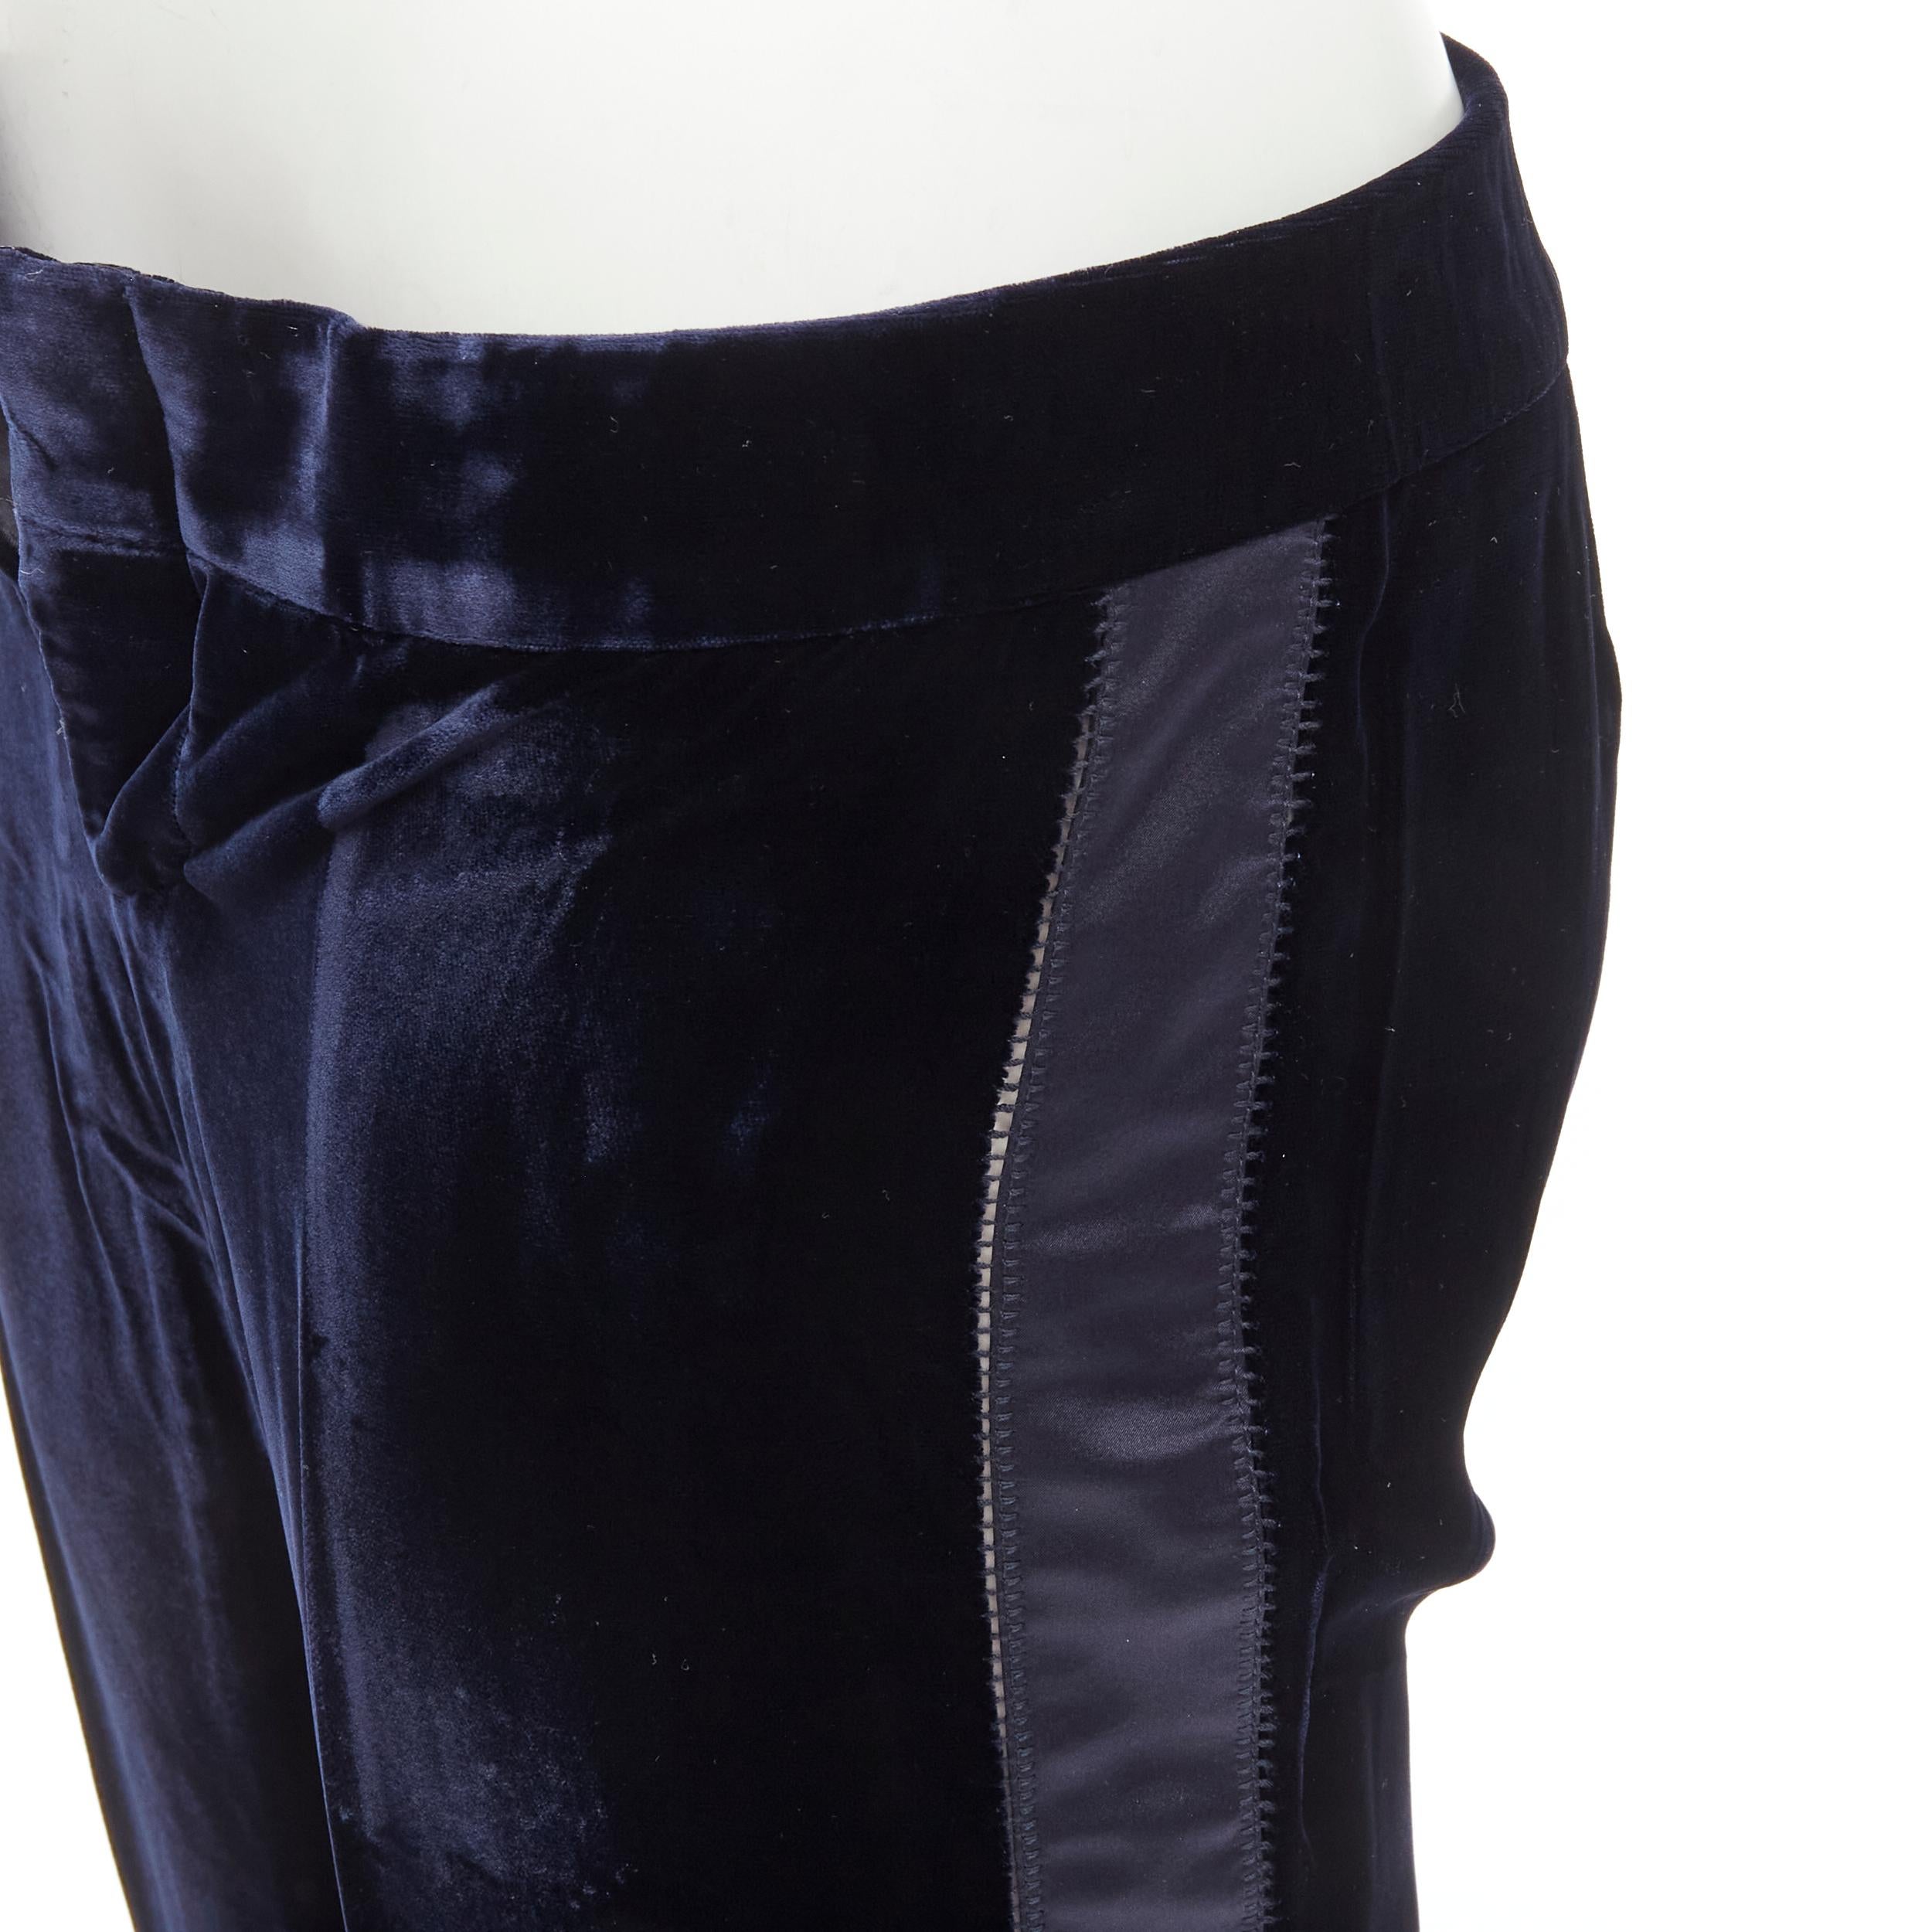 GUCCI Vintage navy blue velvet ladder seam side stripe tuxedo pants IT38 XS 
Reference: ANWU/A00571 
Brand: Gucci 
Material: Velvet 
Color: Navy 
Pattern: Solid 
Closure: Zip 
Extra Detail: Velvet outer. Side stripe with ladder seams exposing a